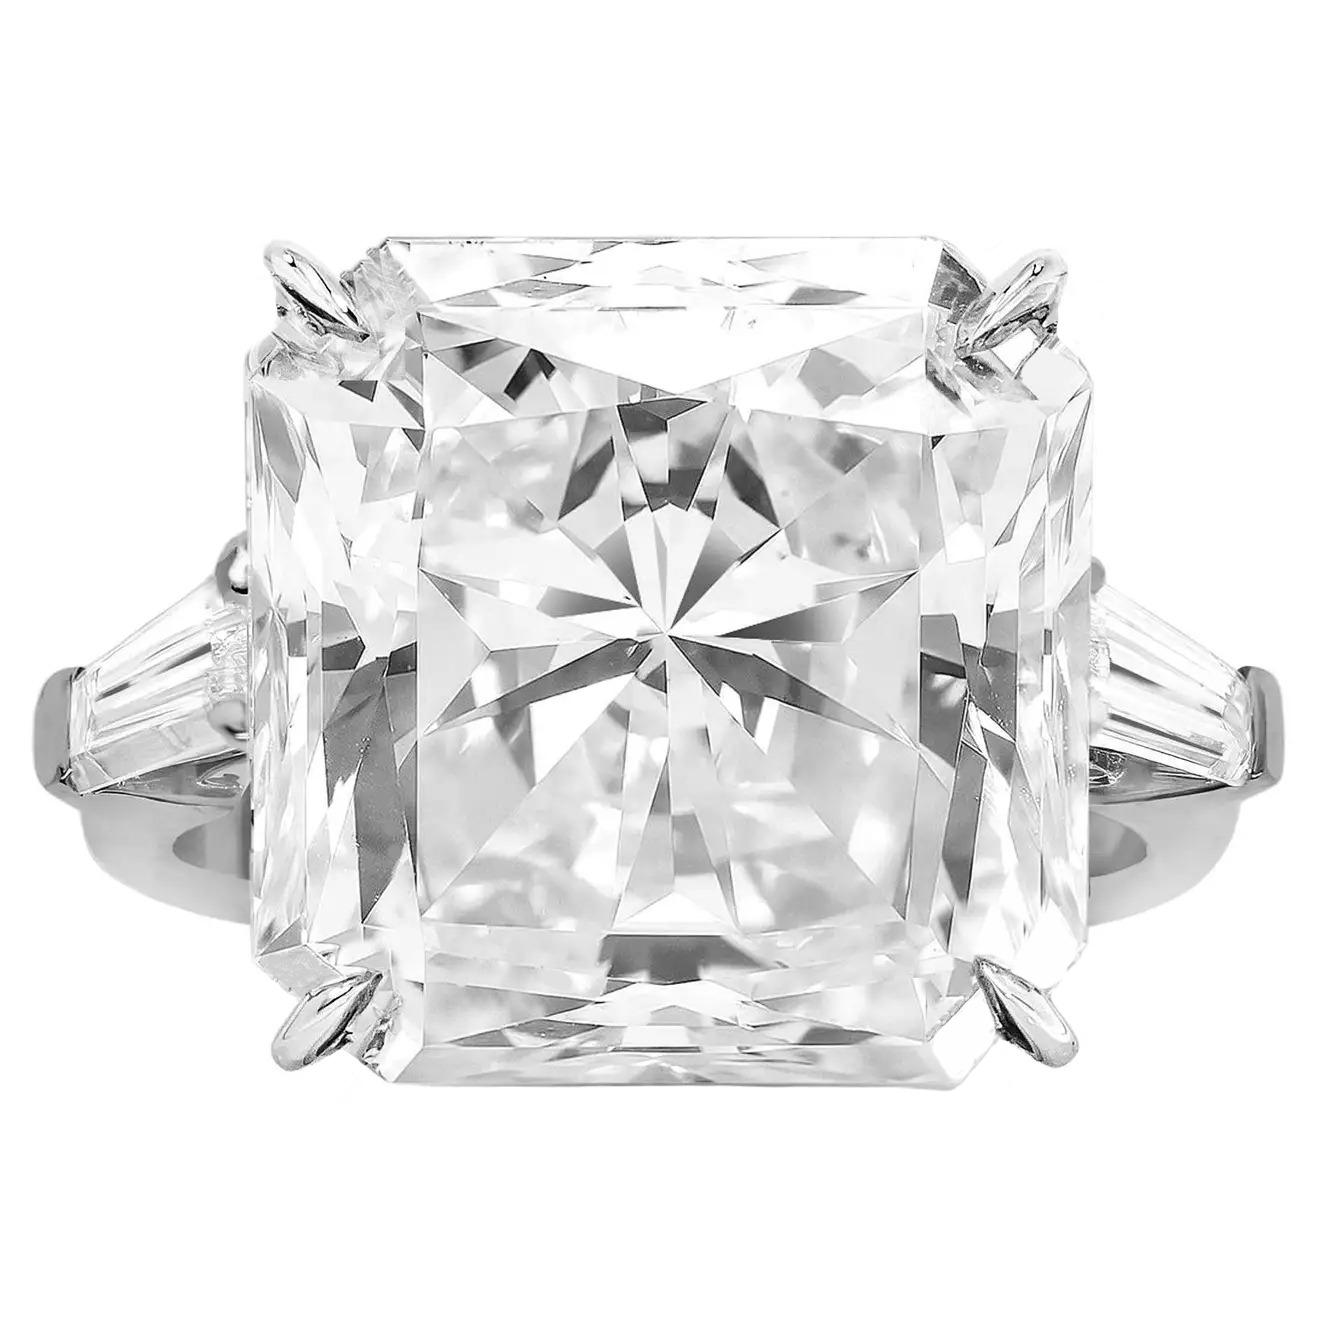 This striking ring features a radiant-cut diamond certified by the Gemological Institute of America (GIA). The diamond, with an impressive weight of 5.03 carats, showcases a captivating F color grade, indicating a near-colorless and highly desirable